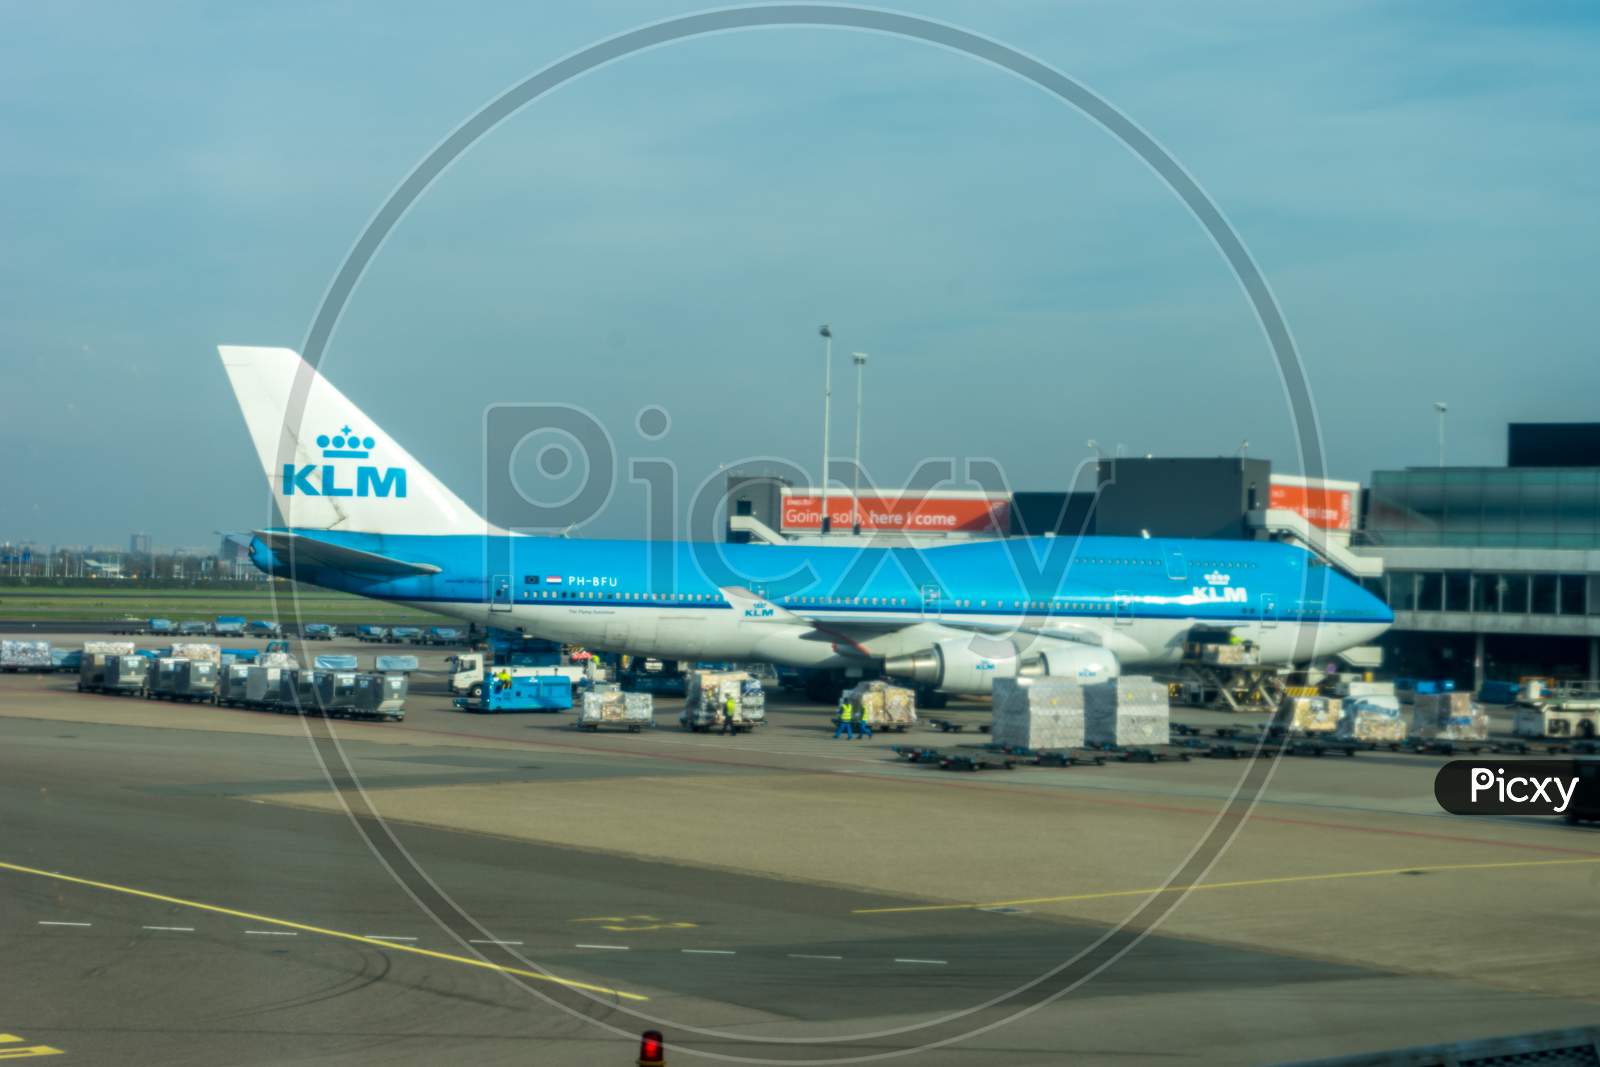 Schiphol, Amsterdam, Netherlands - 4 November 2018 : Klm Planes Waiting At The Airport Dock With Ing Bank Sponsor Advertisements